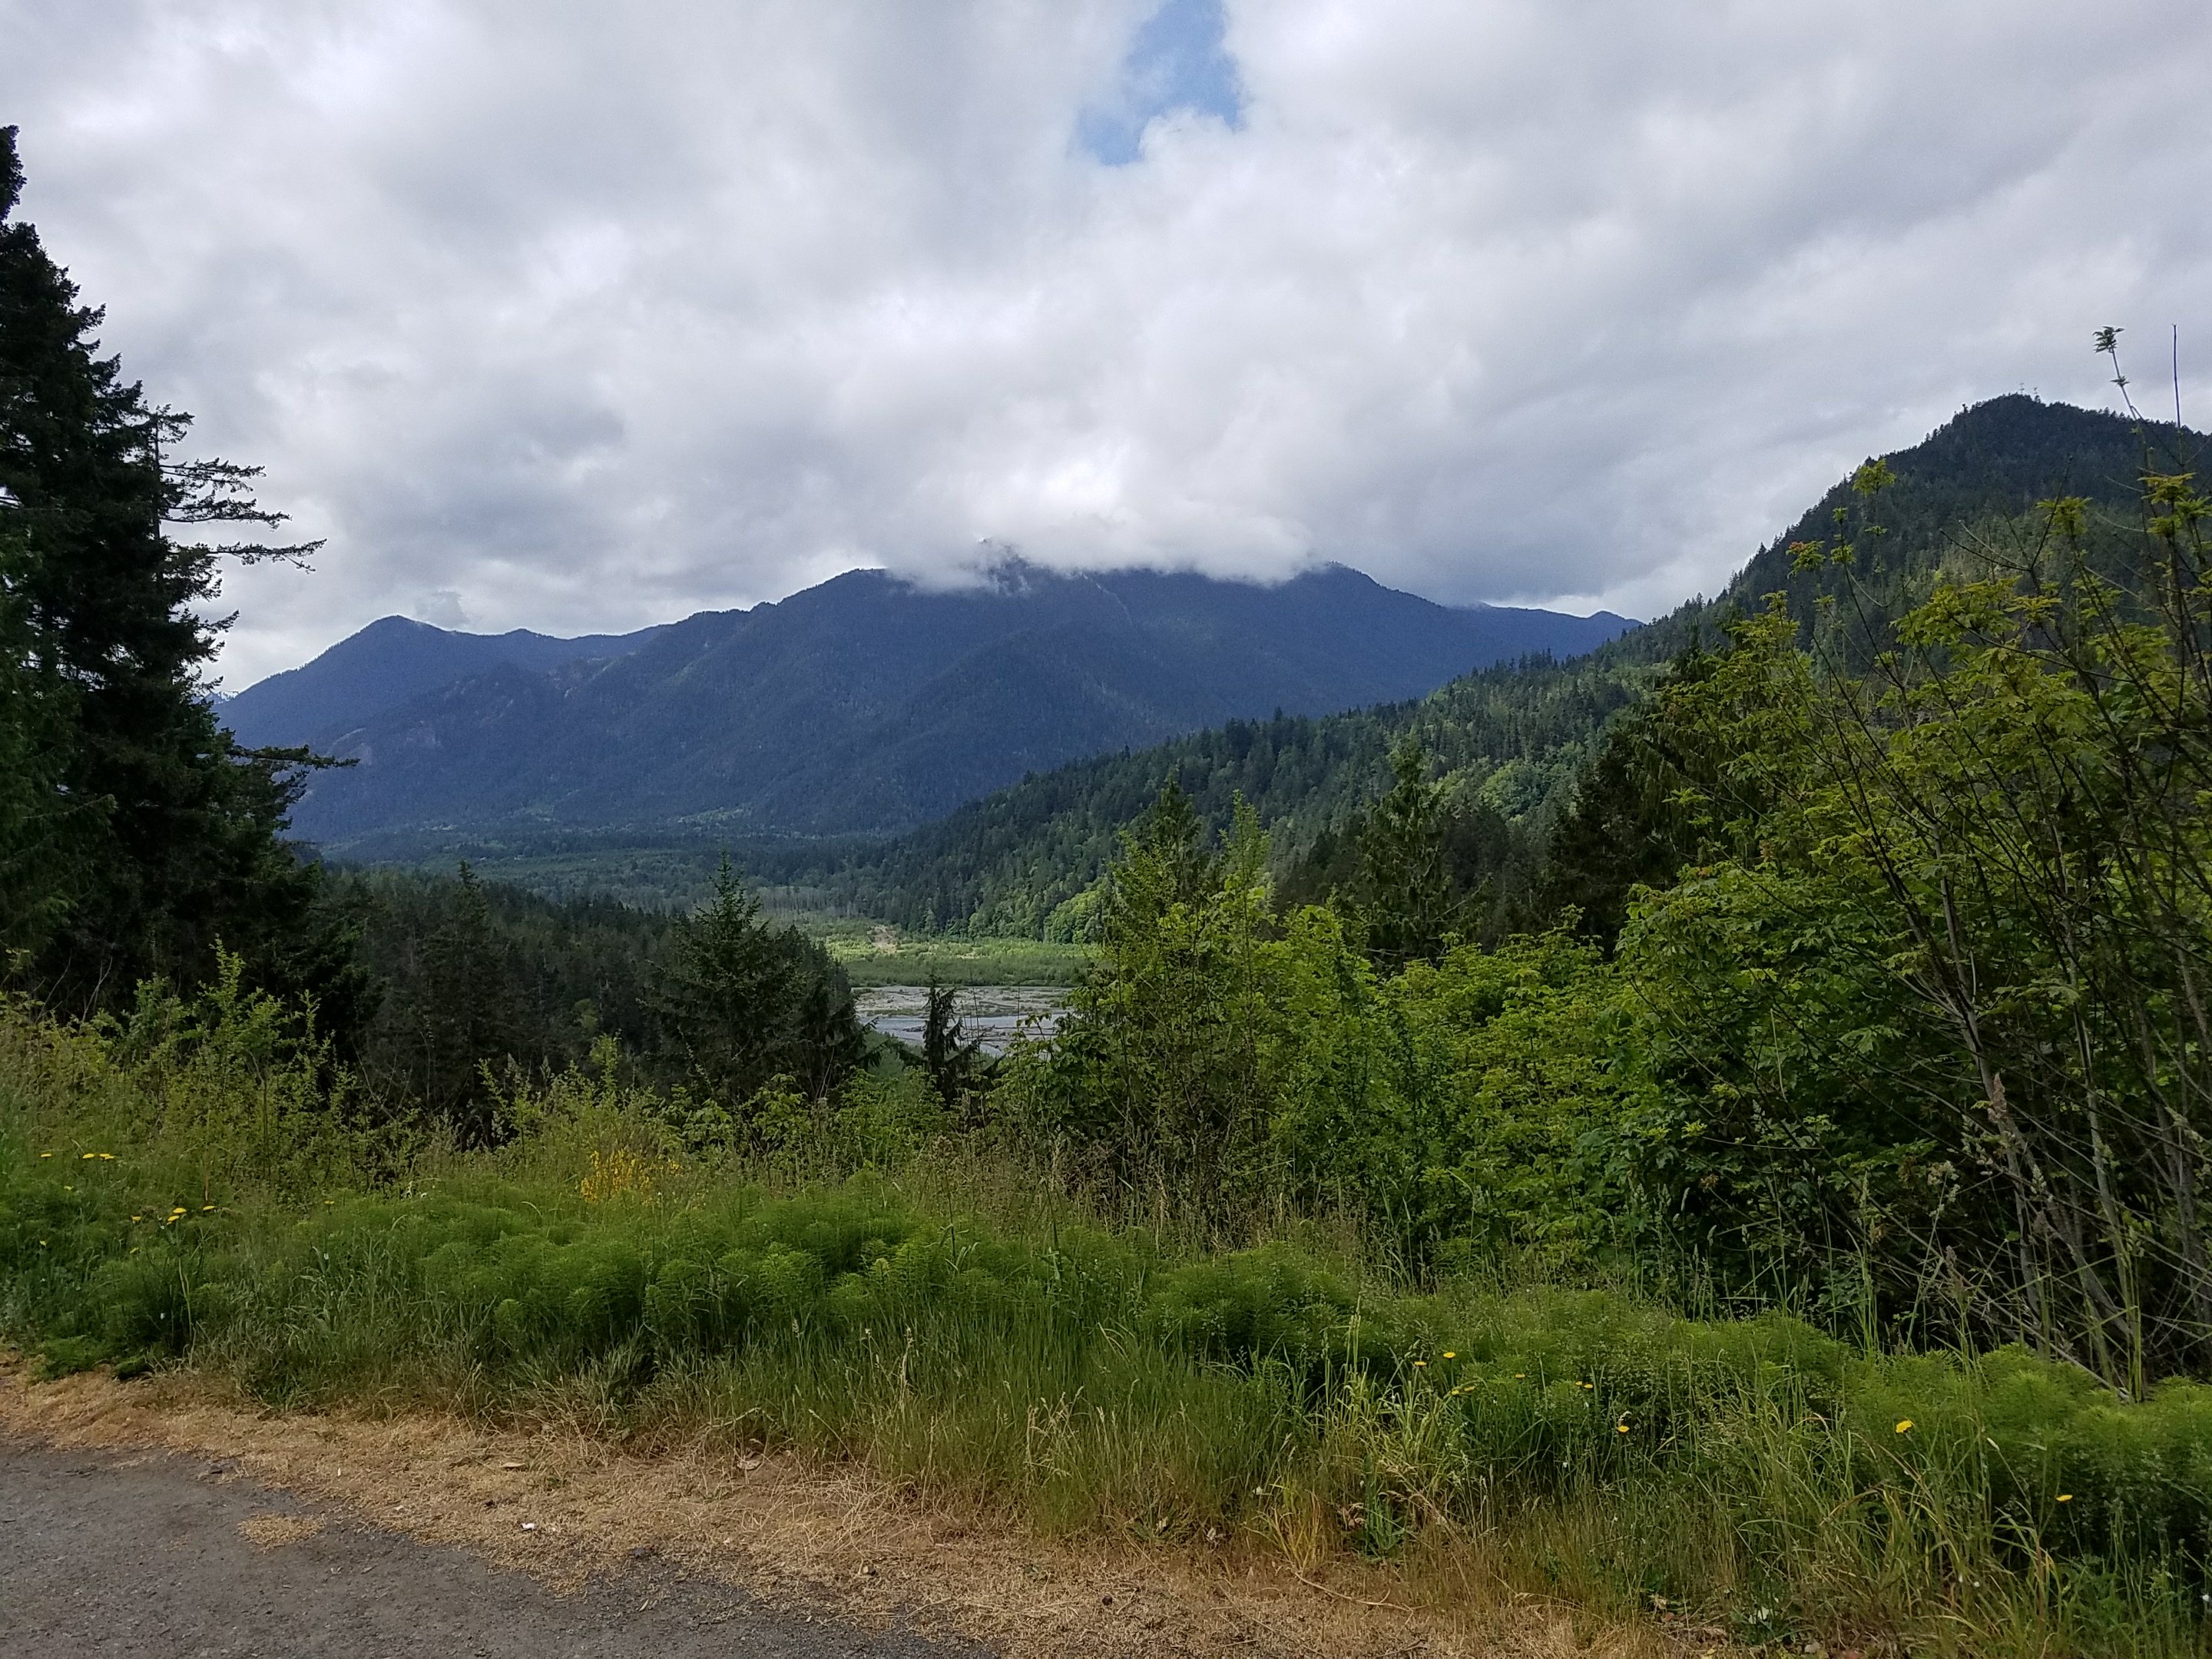 Day Four: Port Angeles to Lake Crescent